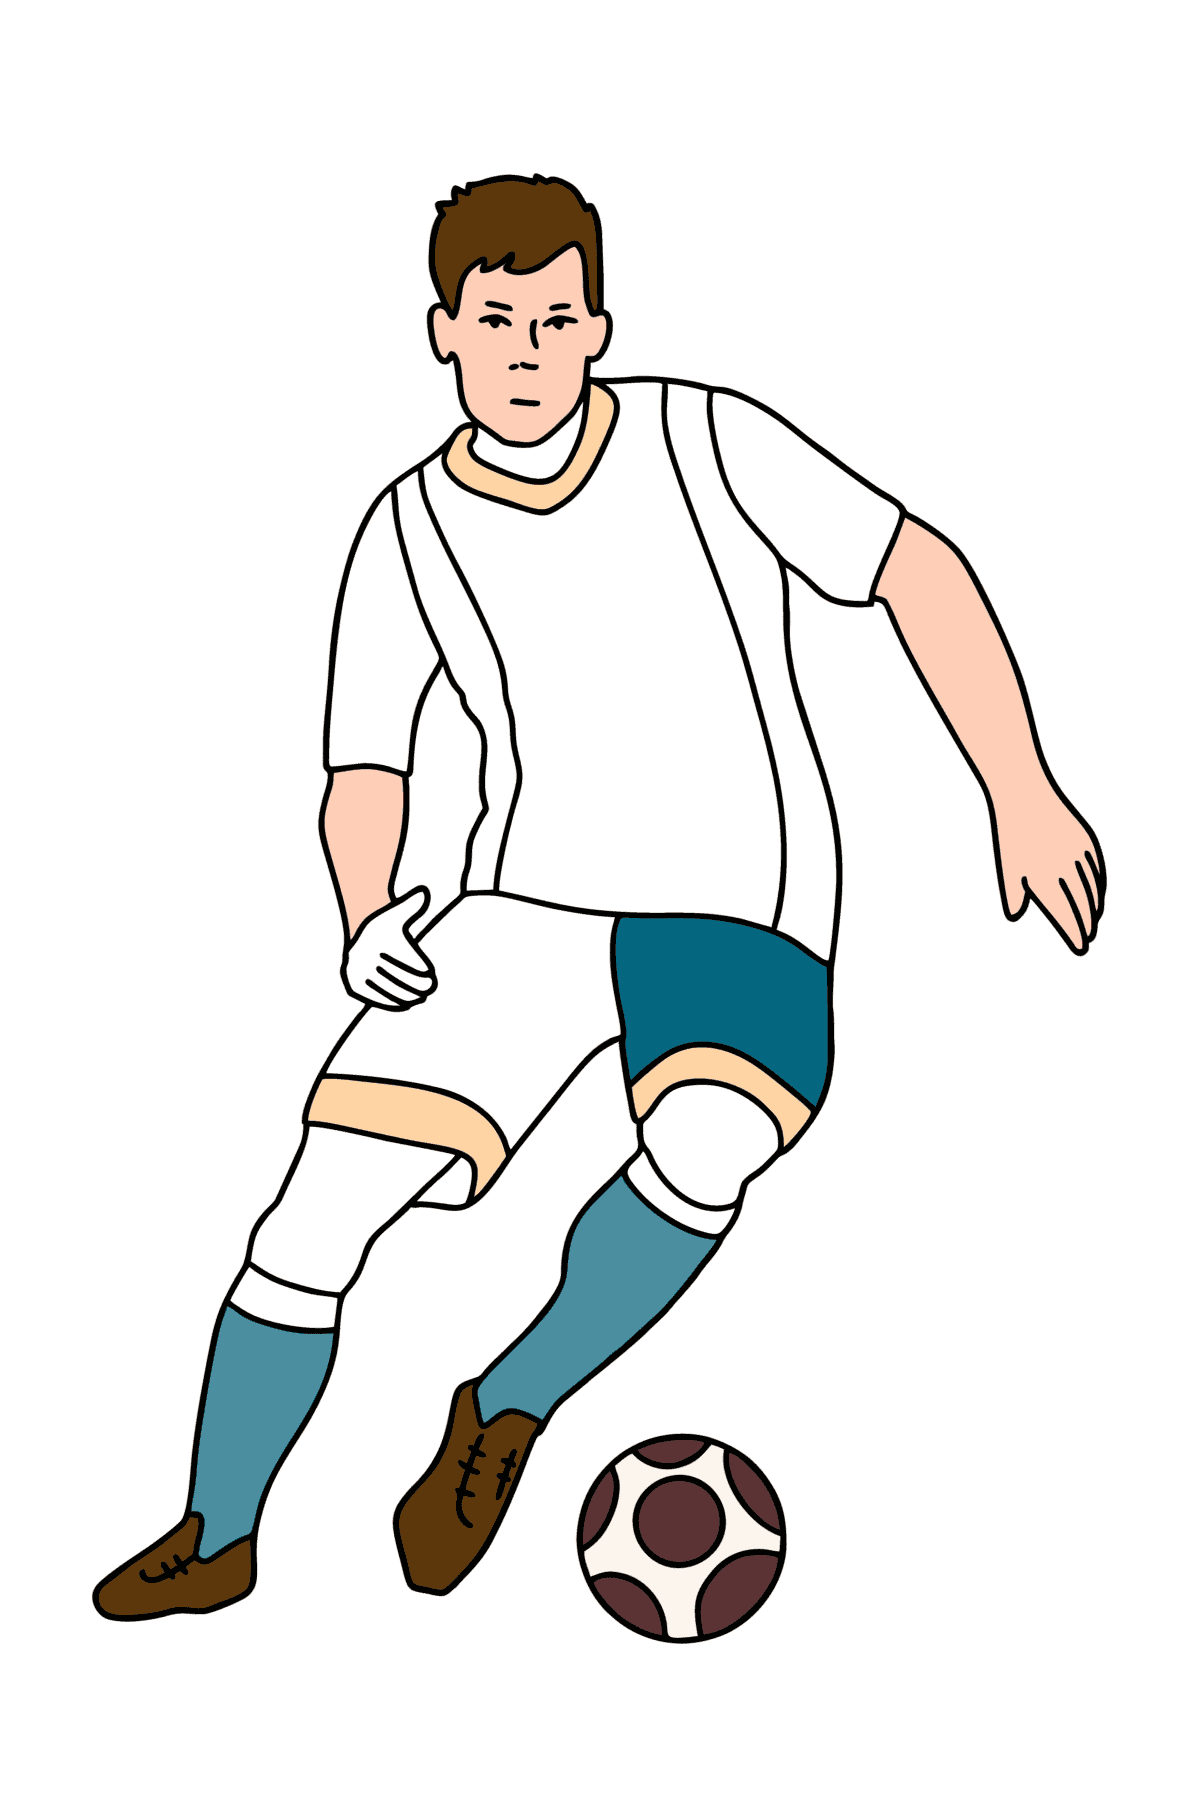 UEFA Football Player сoloring page - Coloring Pages for Kids